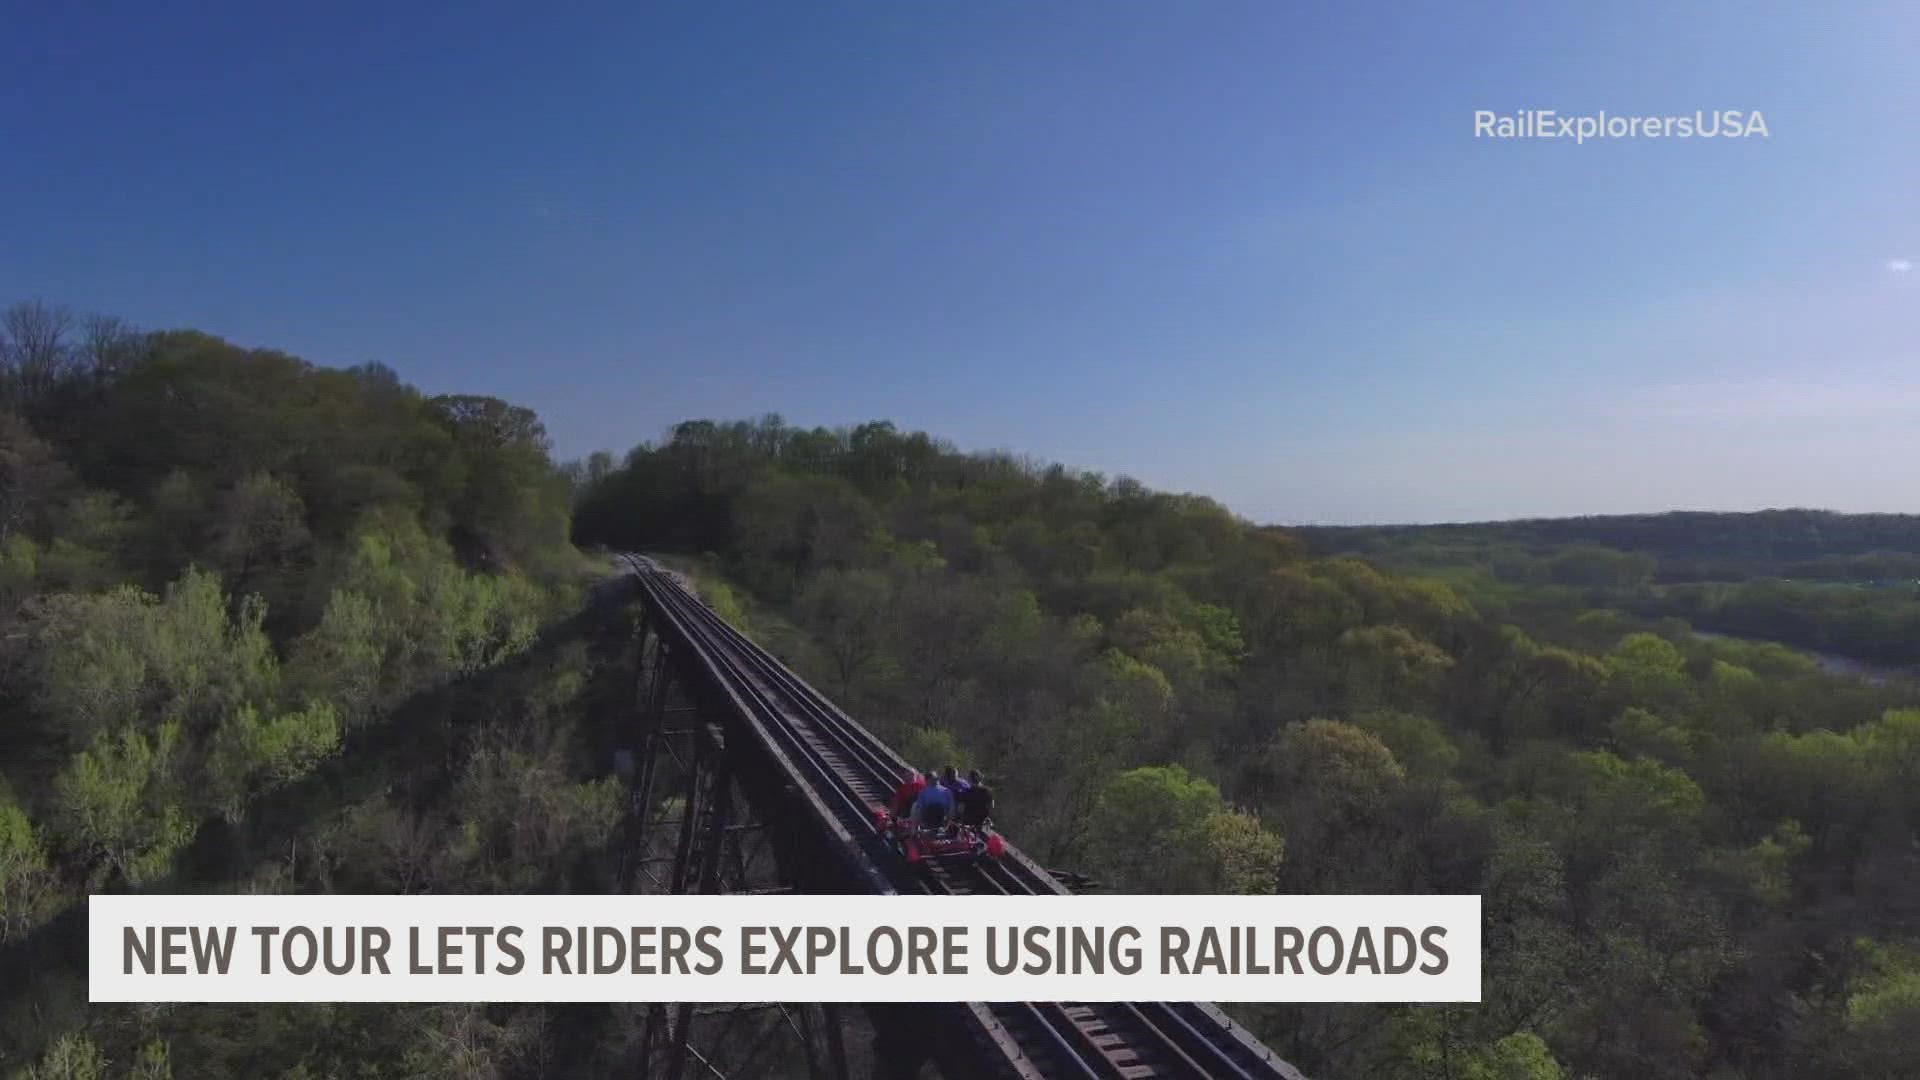 Rail Explorers hopes to give underused or abandoned railroad tracks around central Iowa new life with tours that preserve history and showcase the state's beauty.